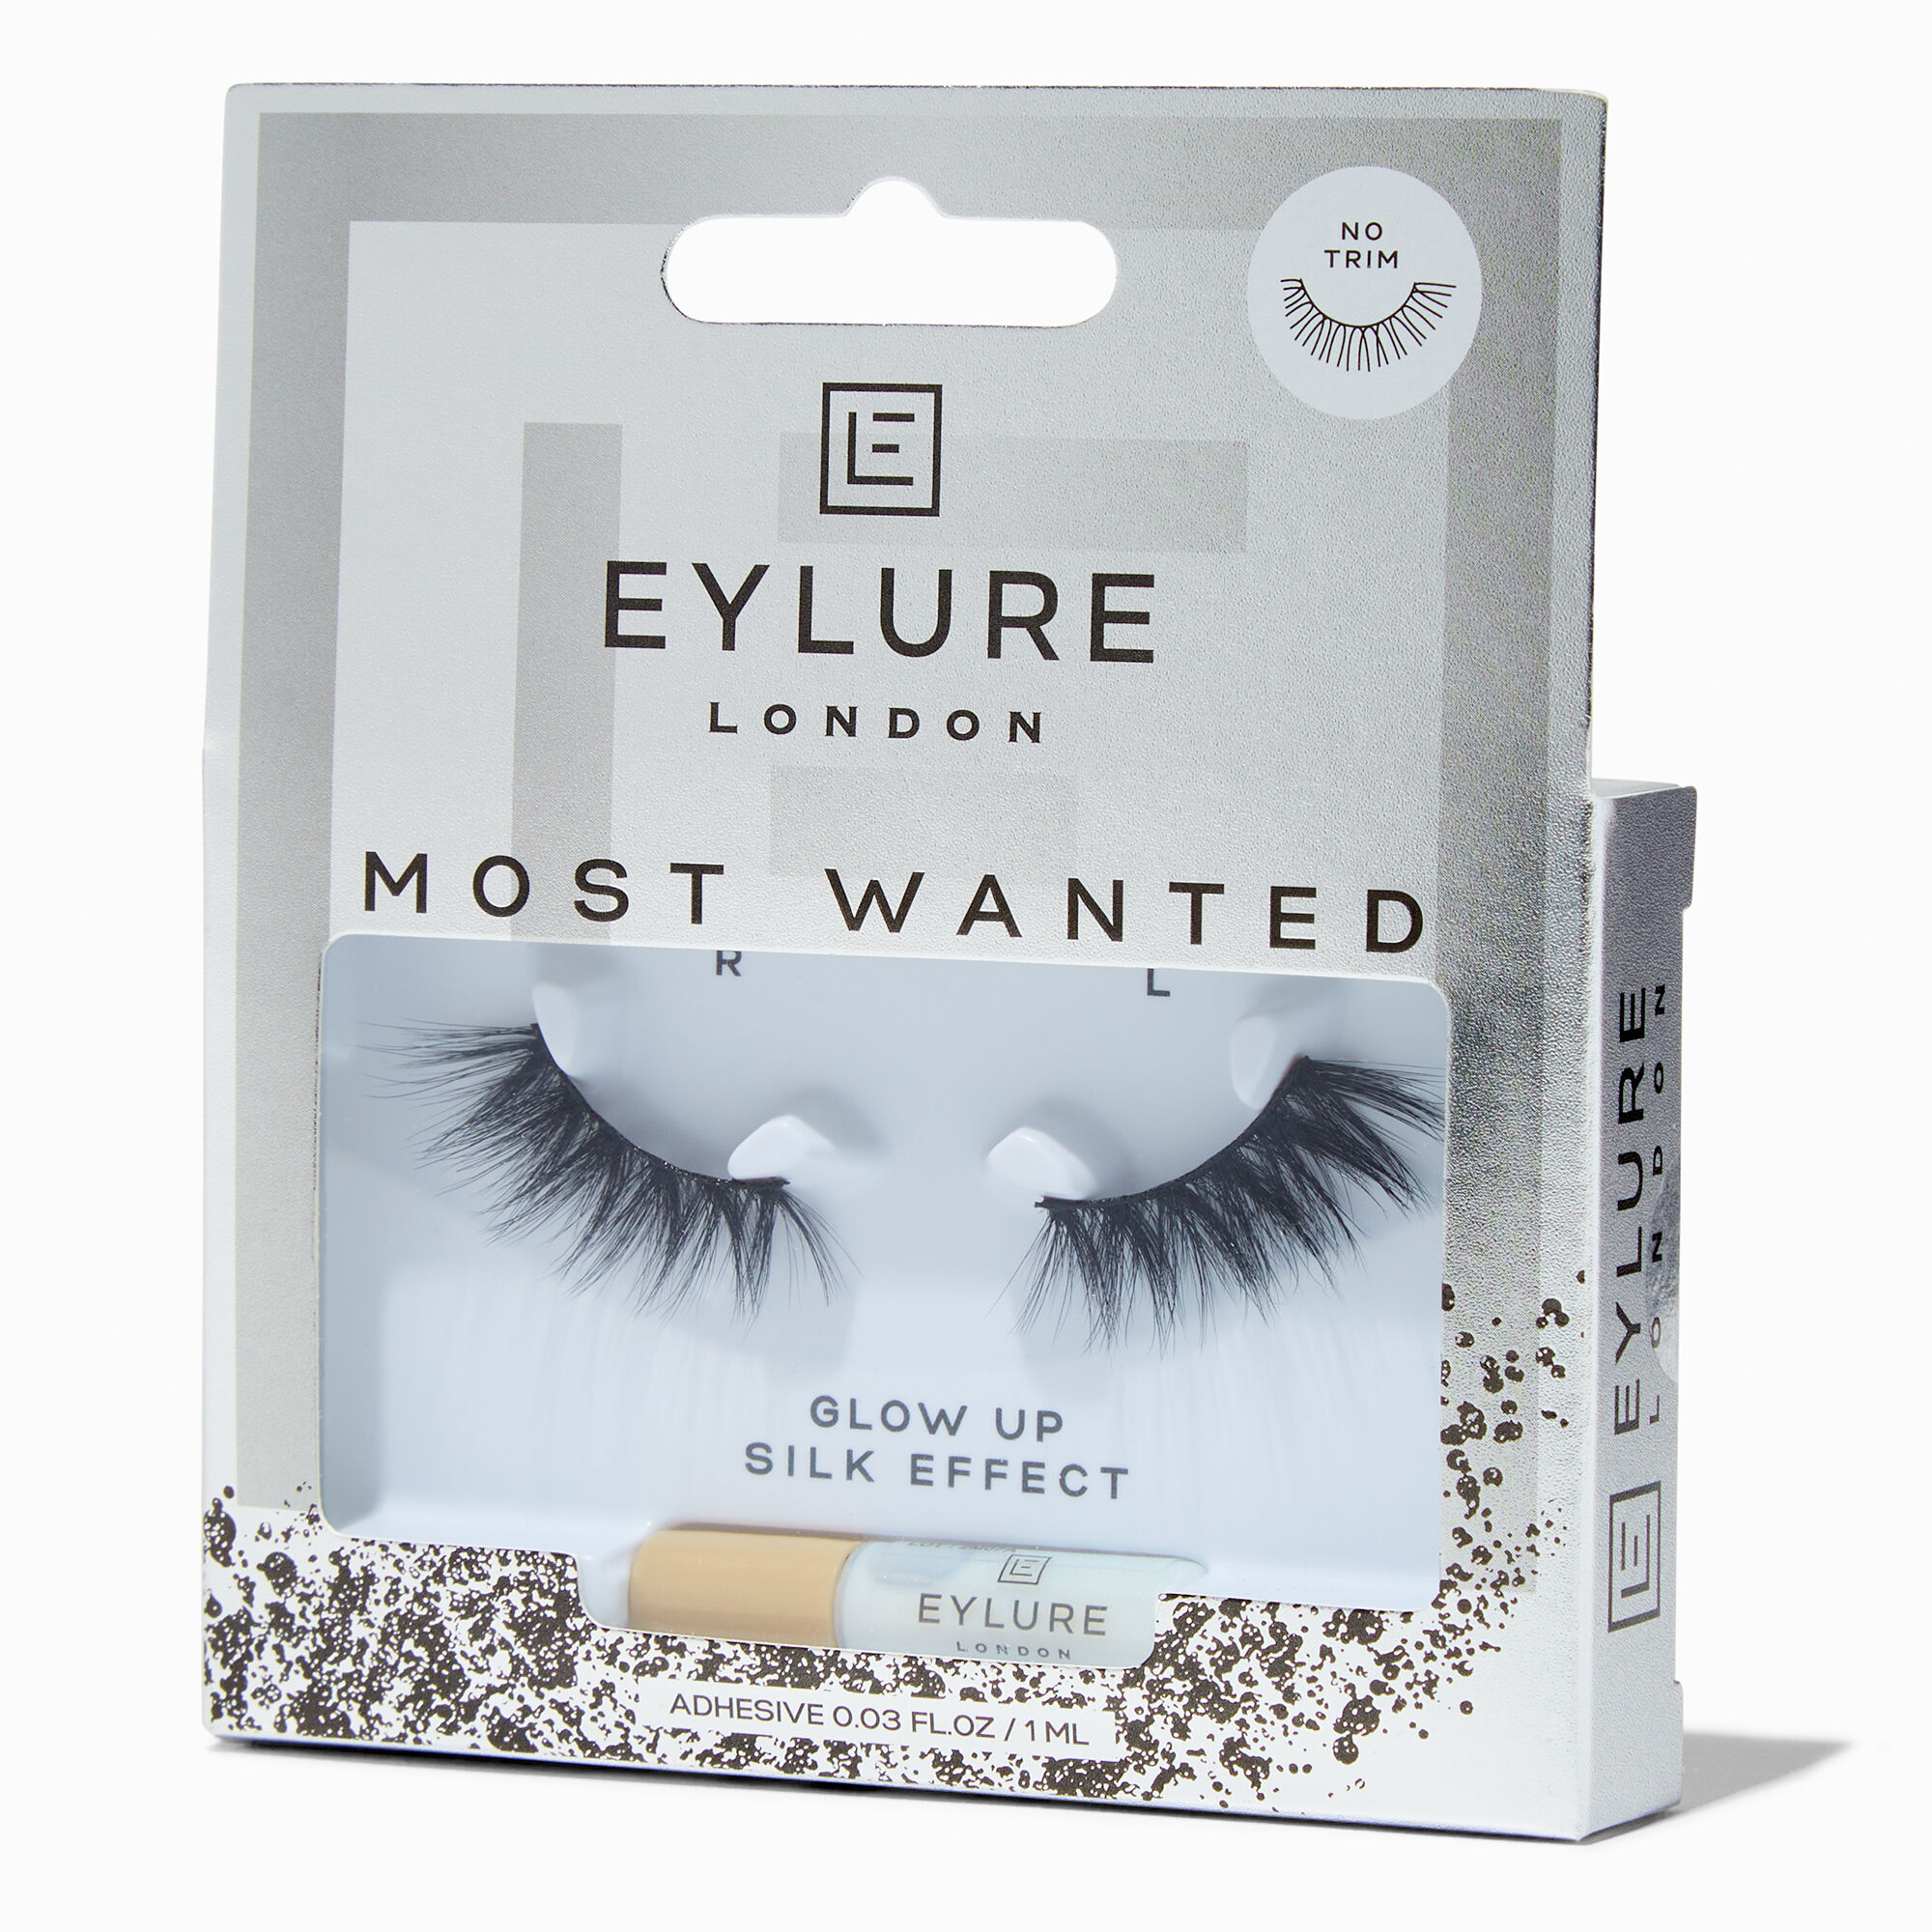 View Claires Eylure Most Wanted Faux Mink Eyelashes Glow Up information